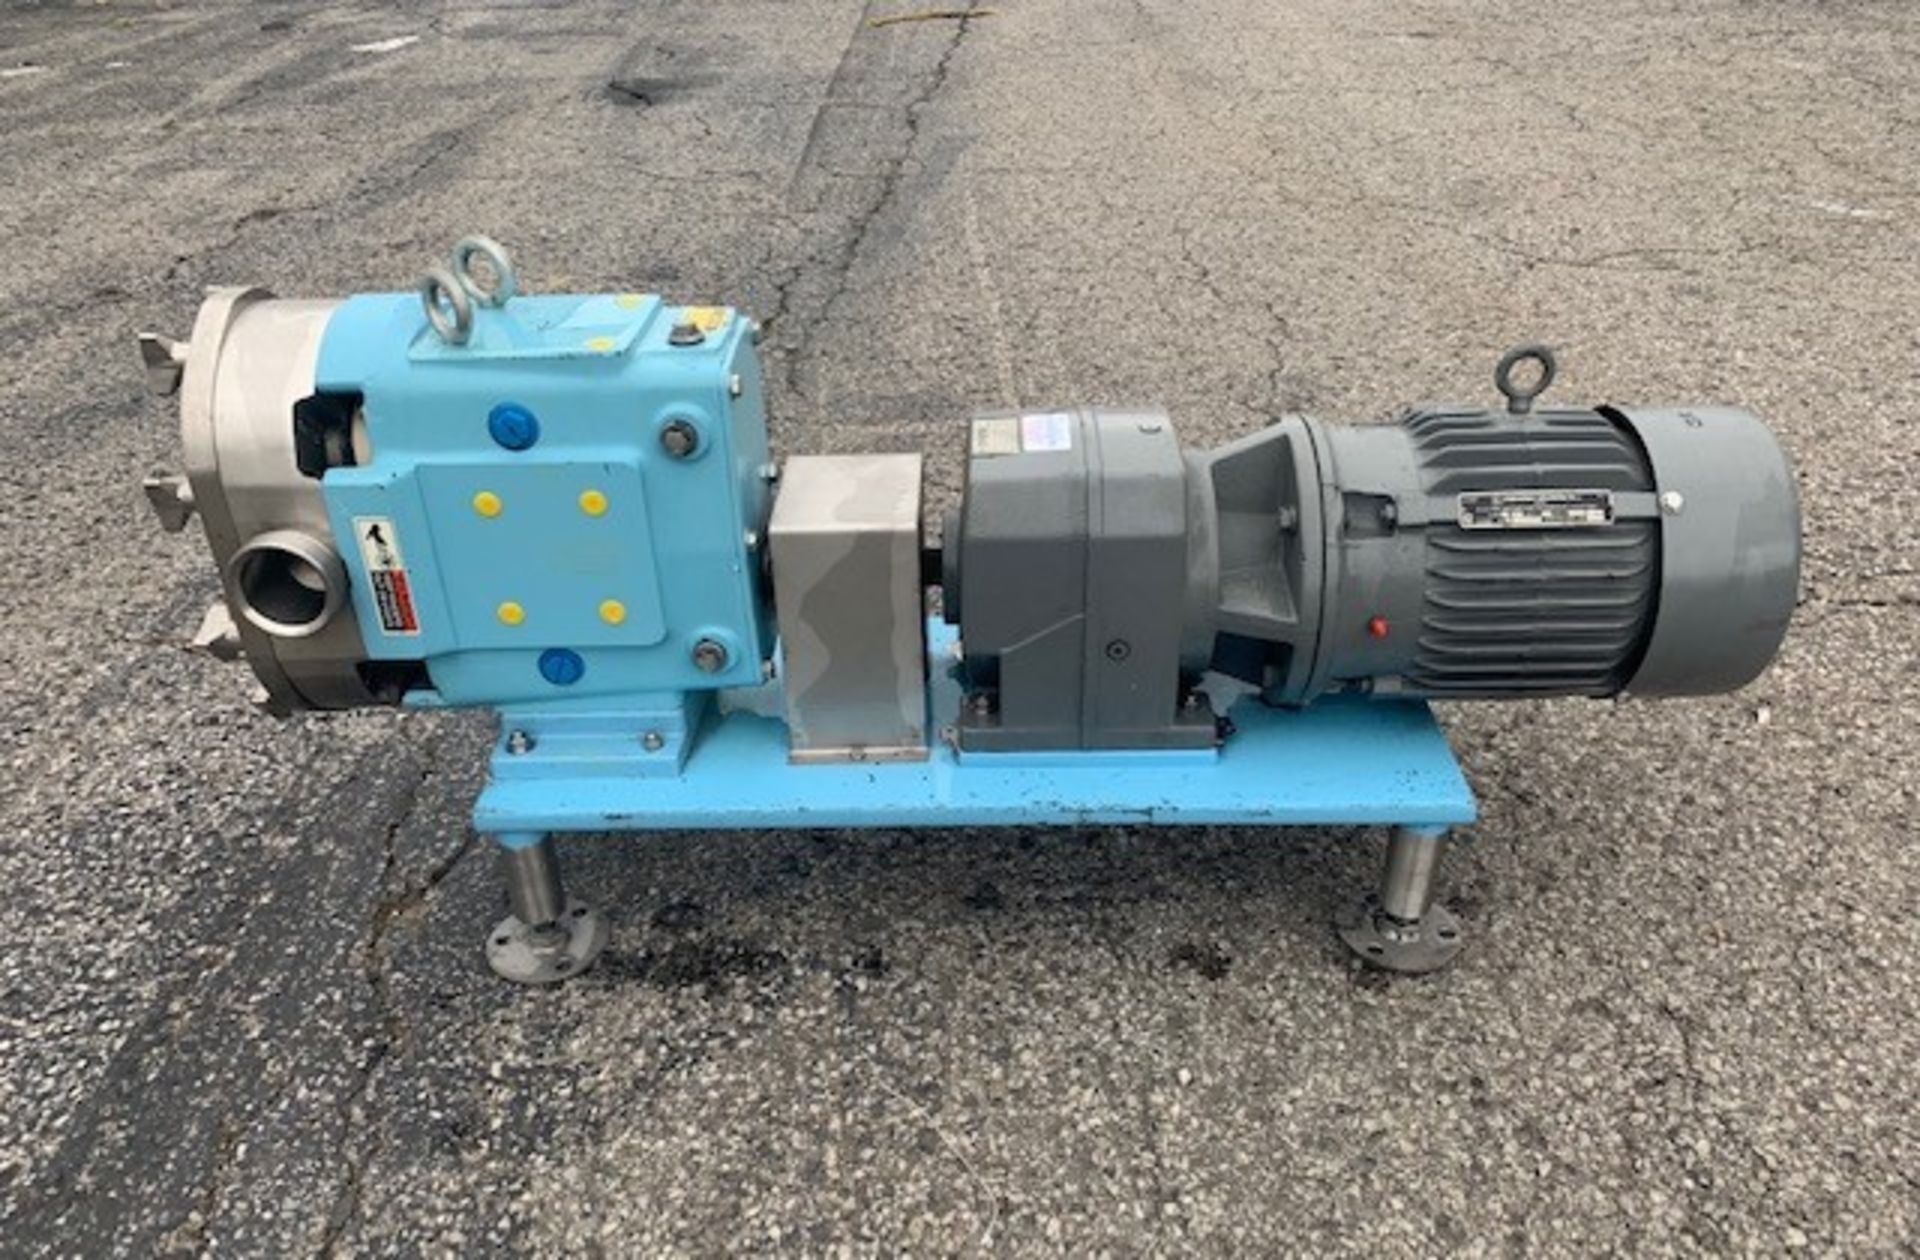 Waukesha 060 Positive Displacement Pump with Sterling Gear Reduction, Powered by 3 hp Motor, - Image 2 of 7